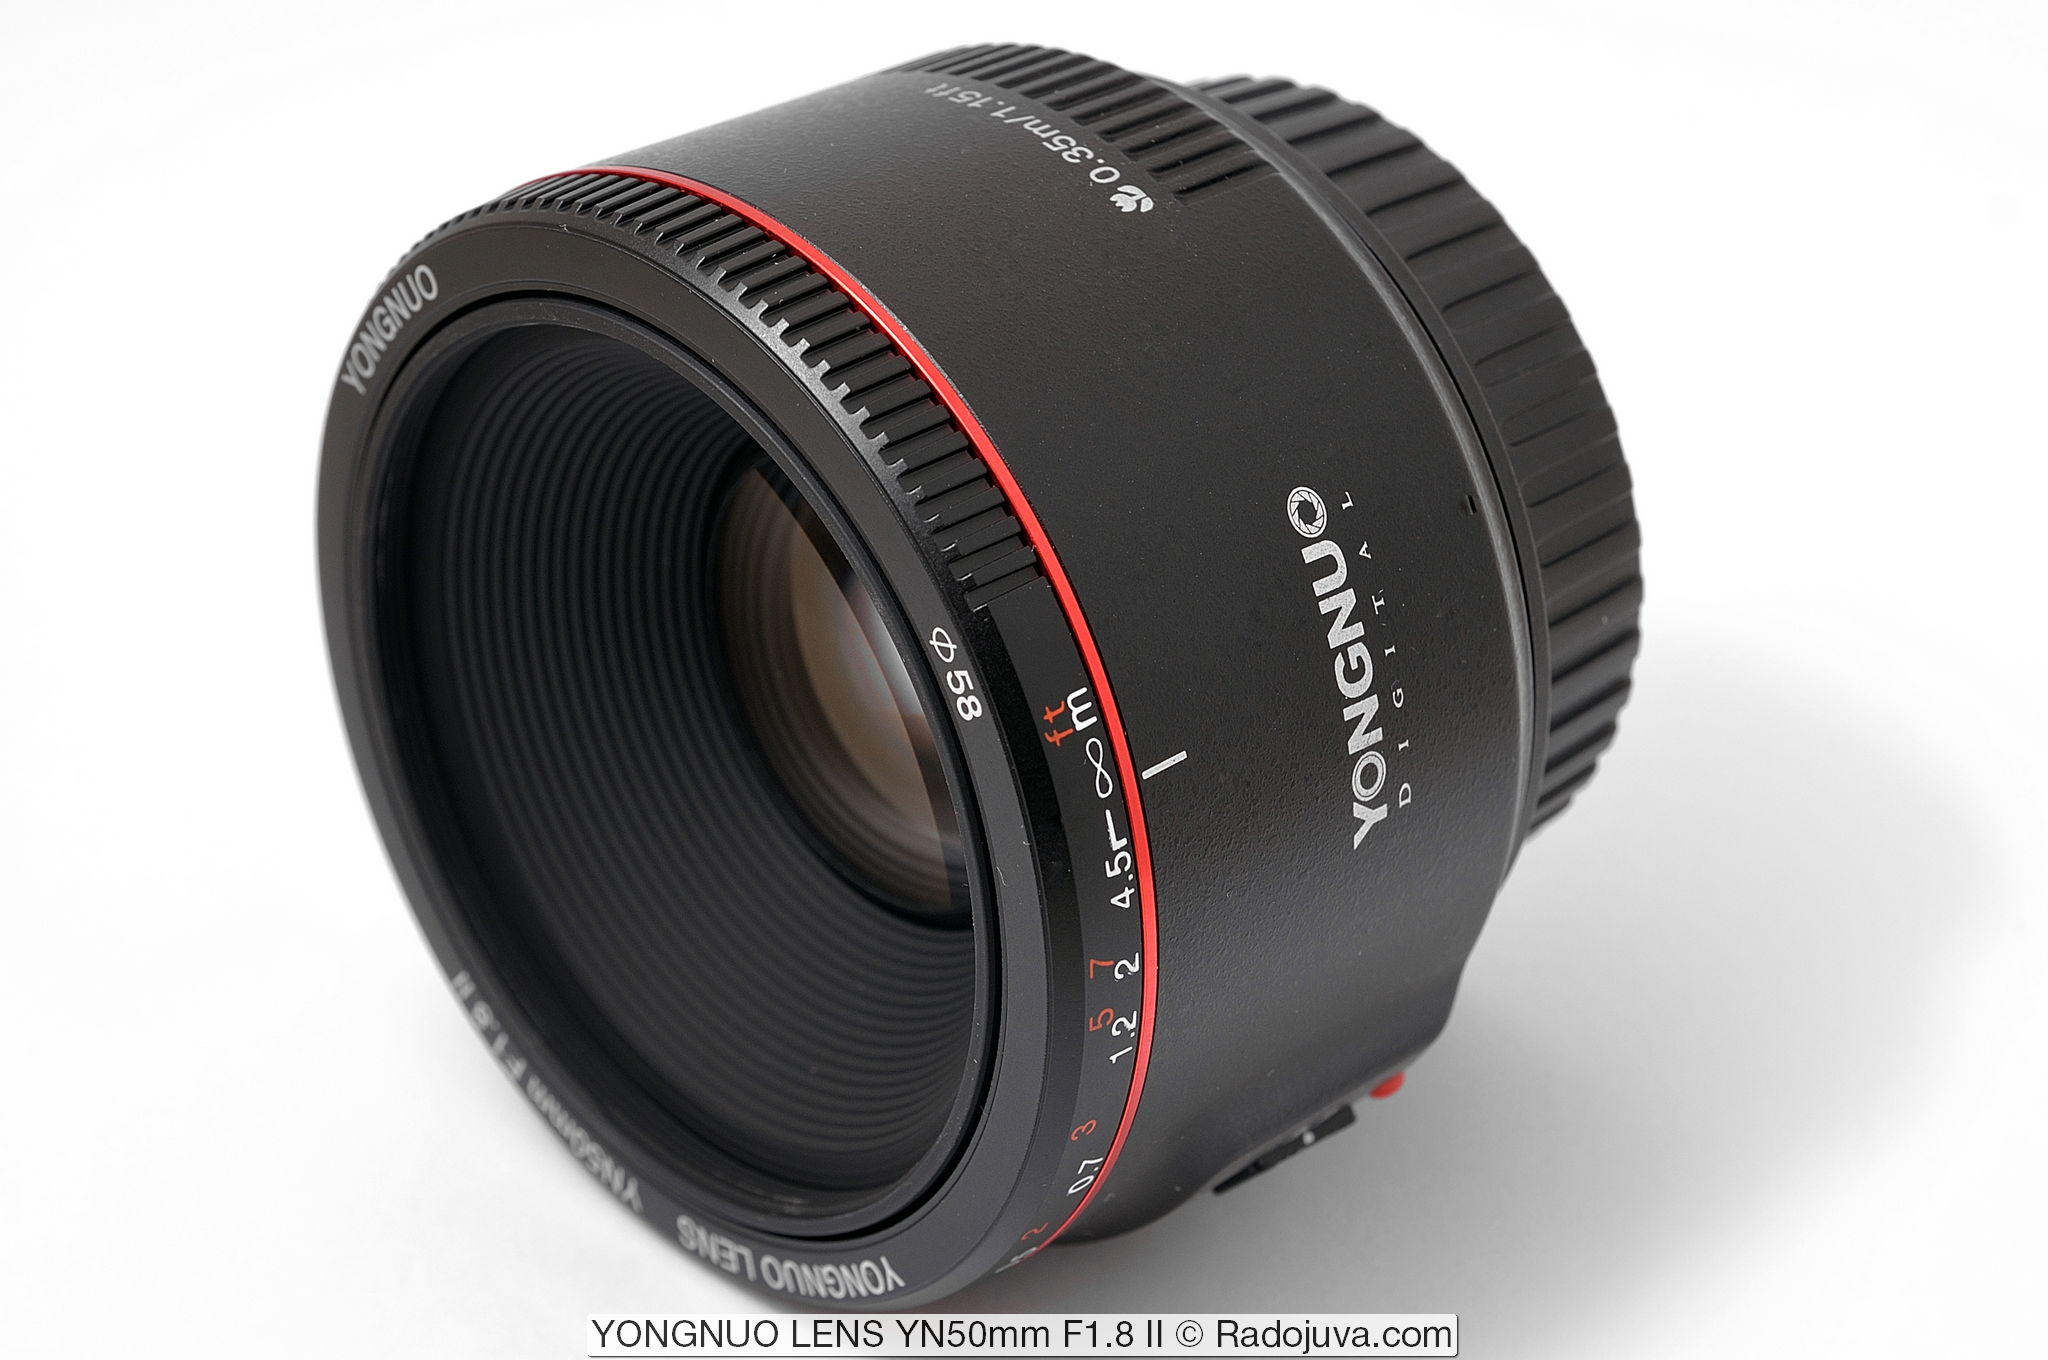 Yongnuo 50mm f / 1.8 II lens review for Canon Happy